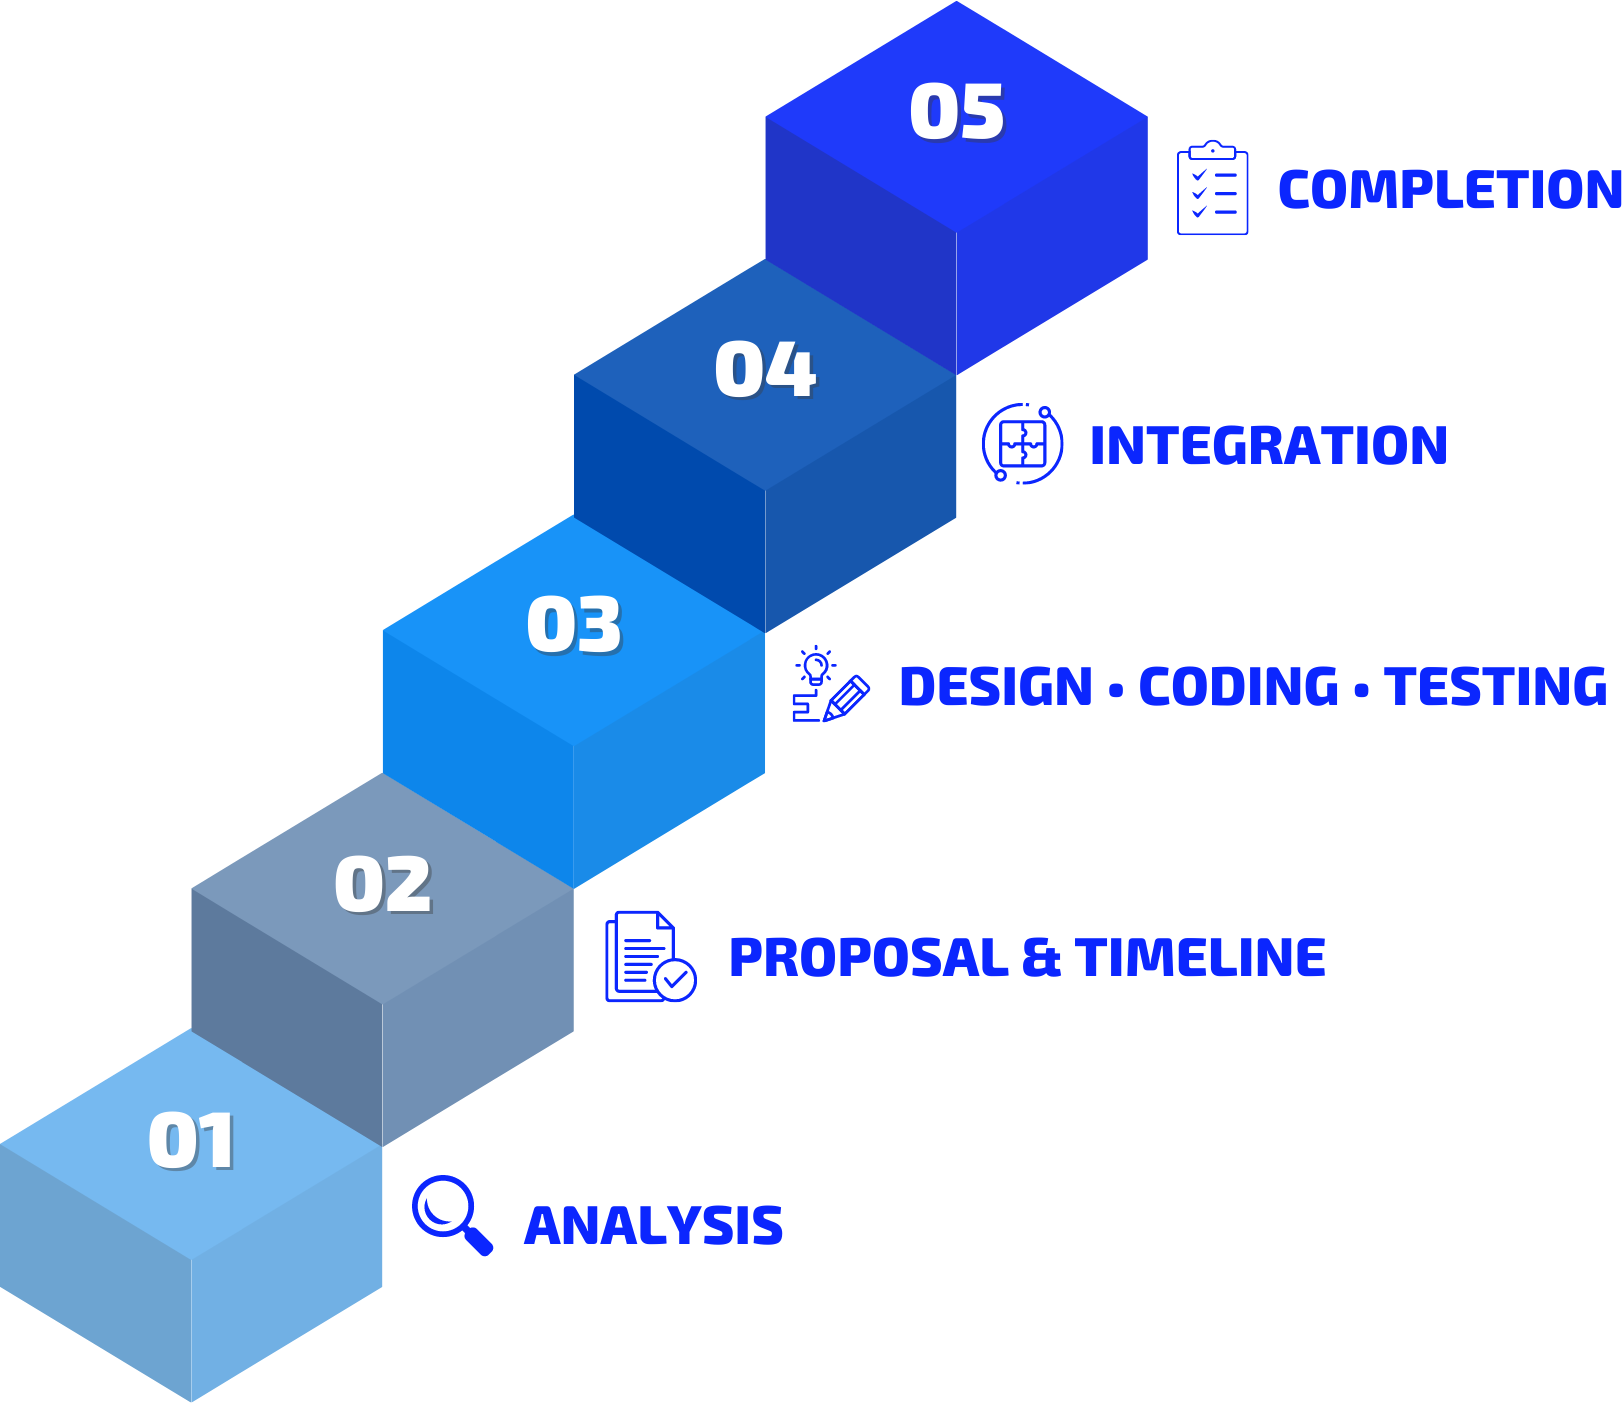 5 Step process completion graphic. 1. Analysis, 2. Proposal & Timeline, 3. Design Coding Testing, 4. Integration. 5. Completion